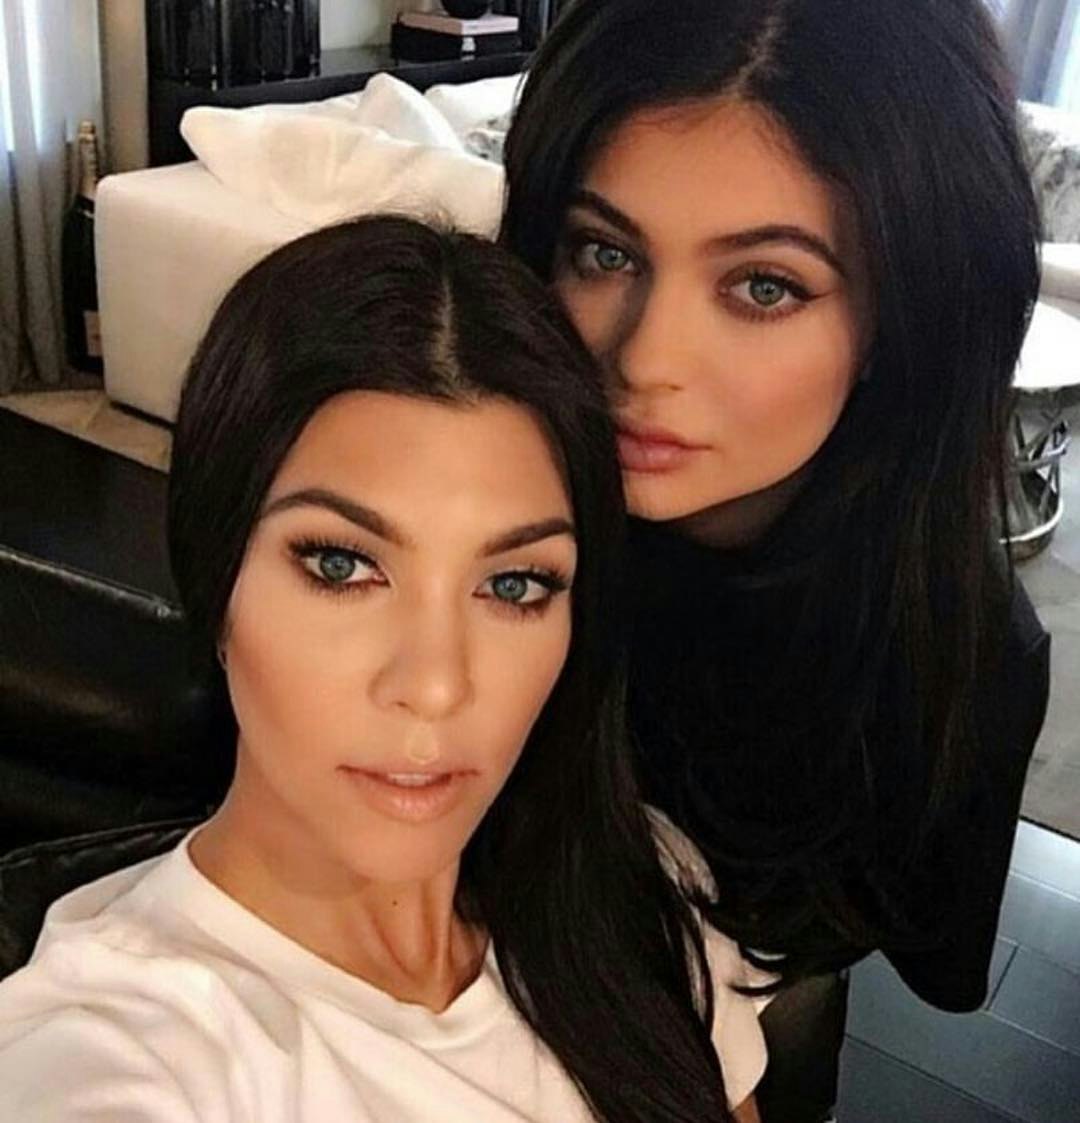 7 Things You Need To Know Before You Try Colored Contacts Like Kylie Jenner